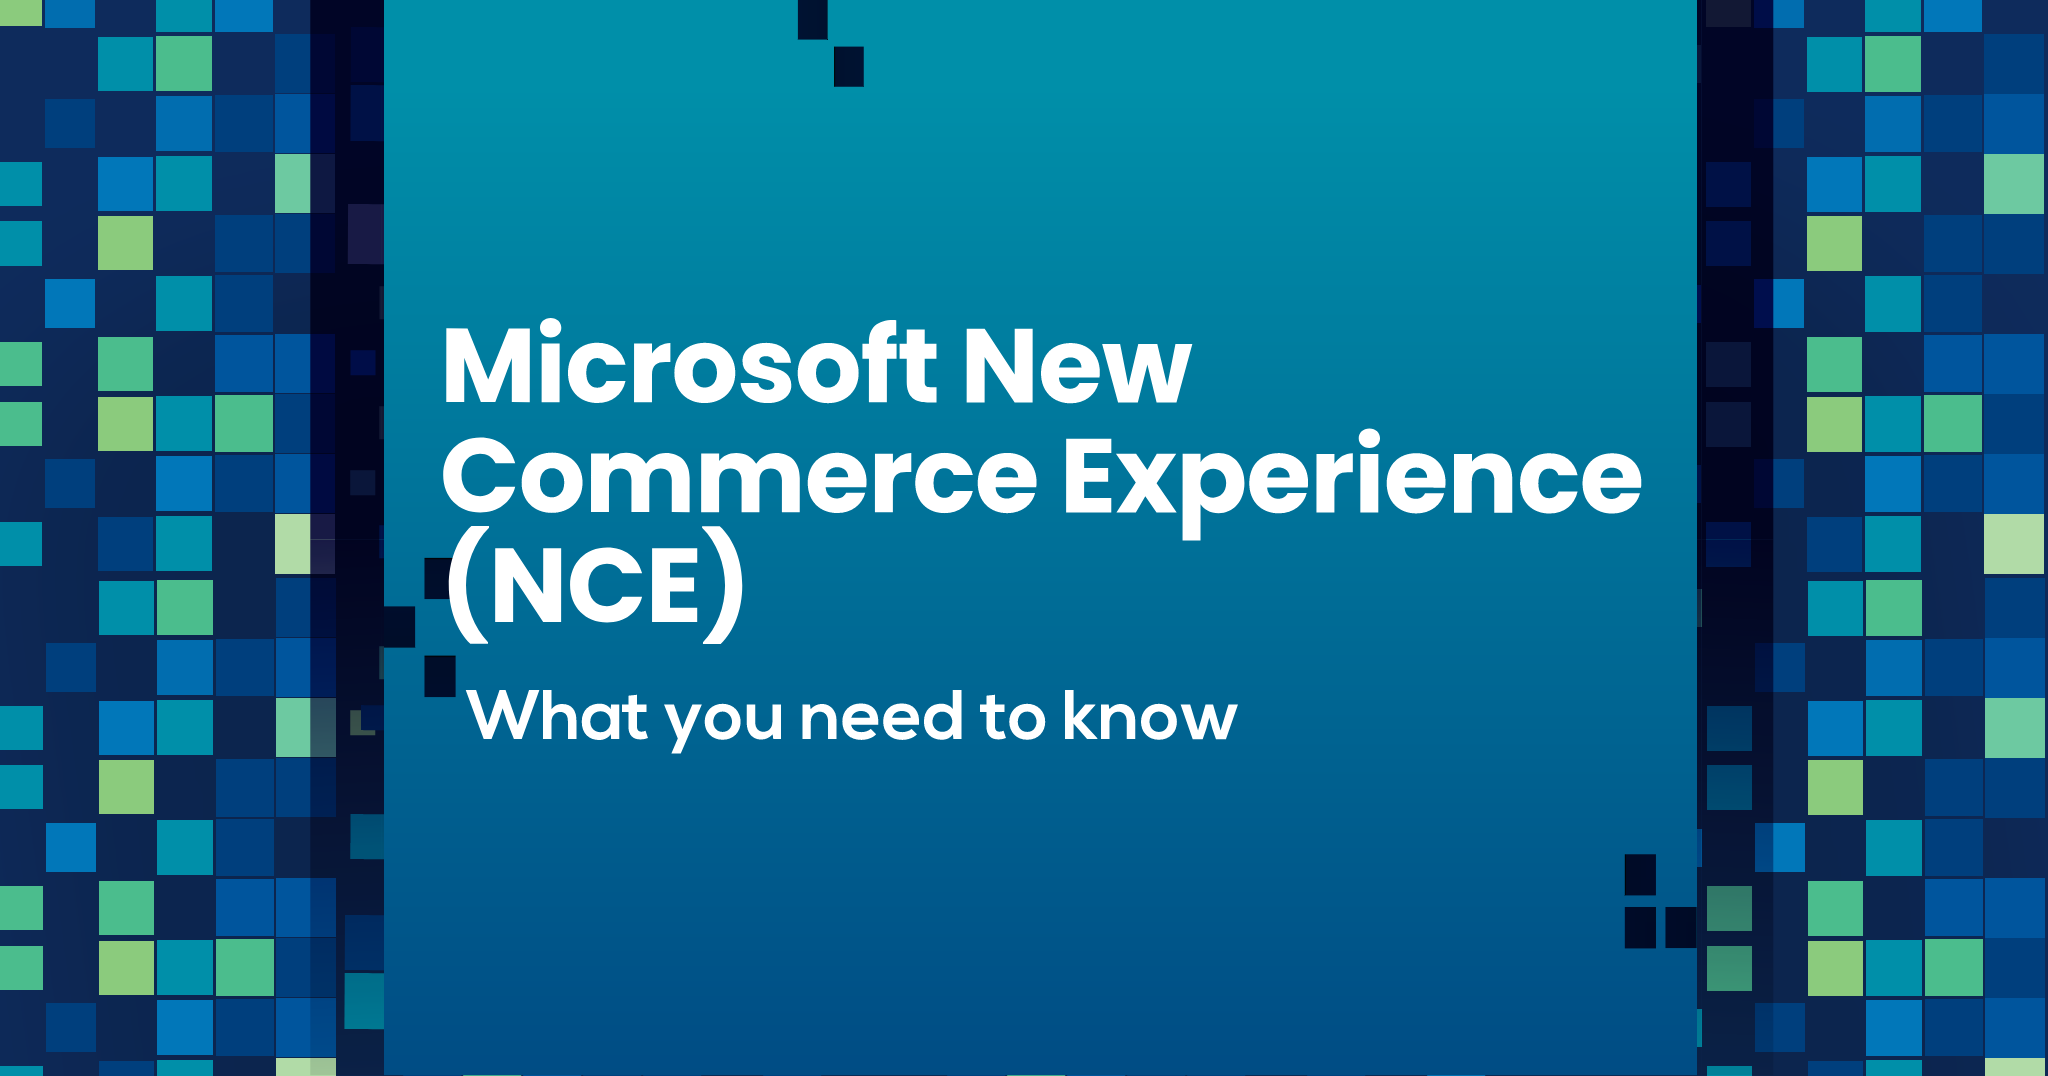 Microsoft New aYour guide to Microsofts New Commerce Experience NCE Vividblock IT Services